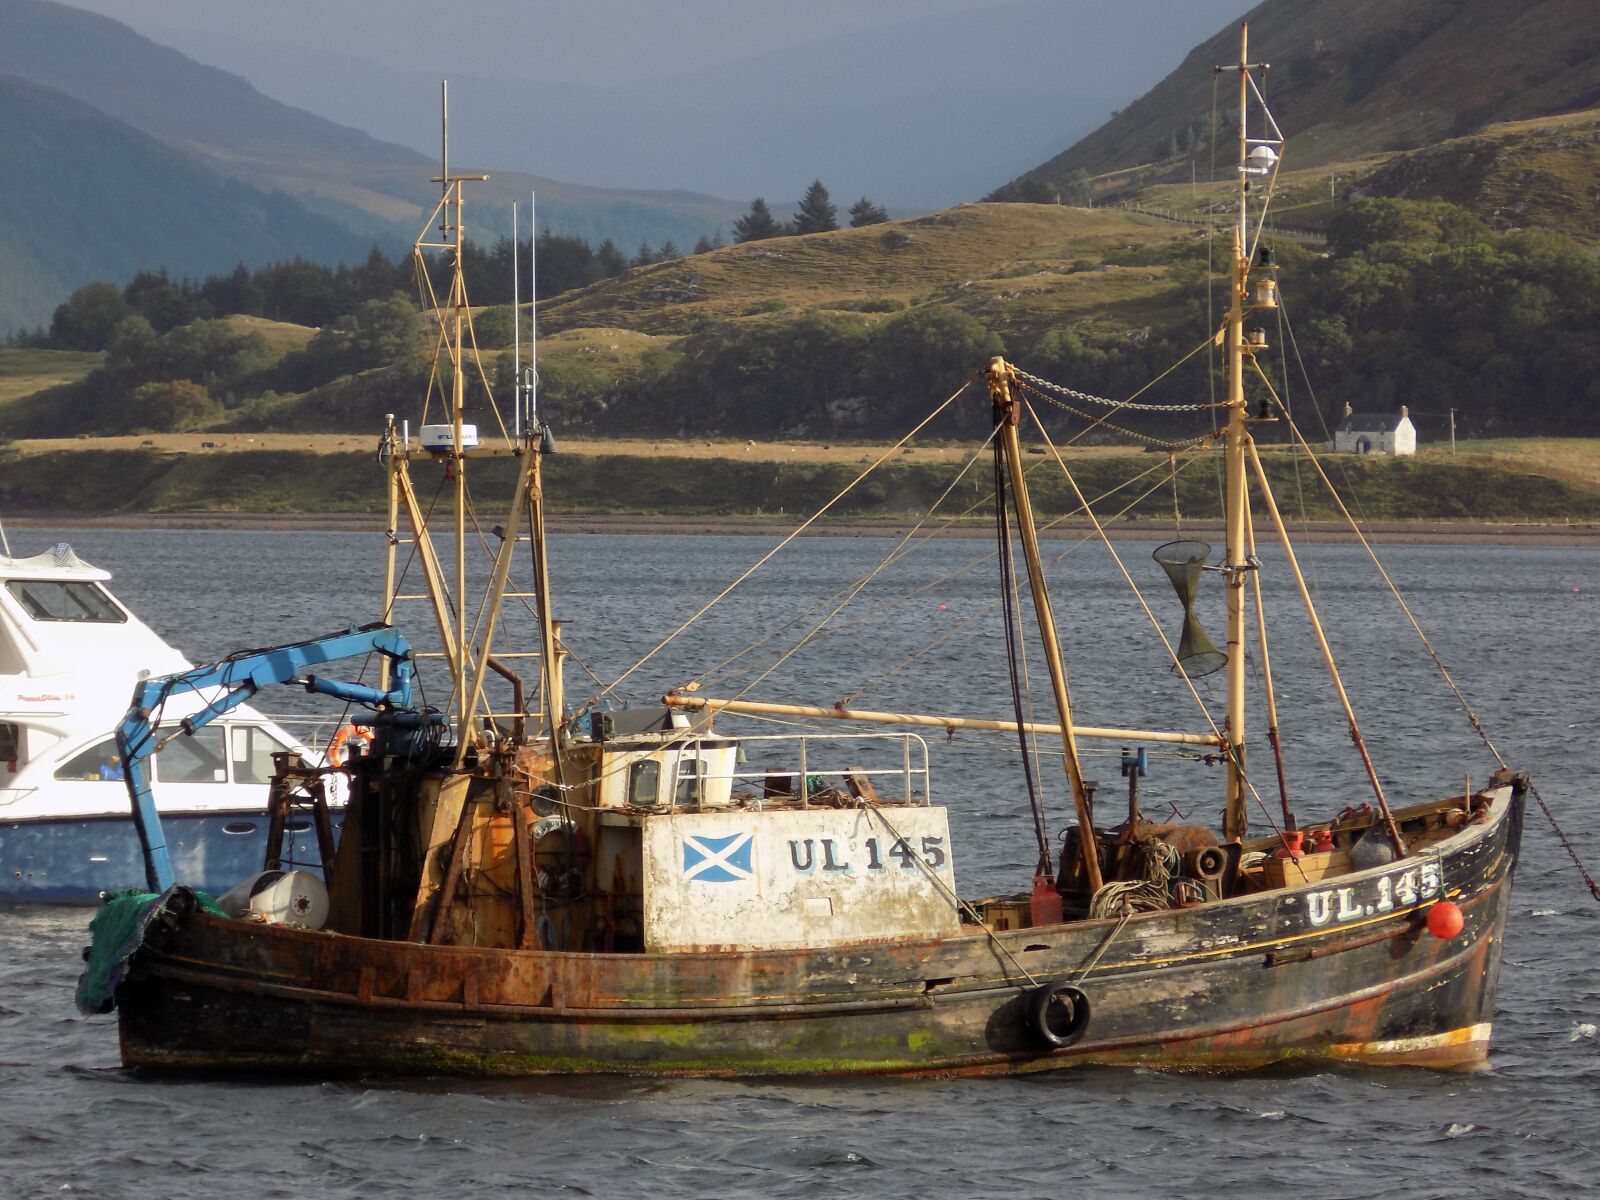 Nikon COOLPIX L340 sample photo. Ullapool, fisher, boat photography